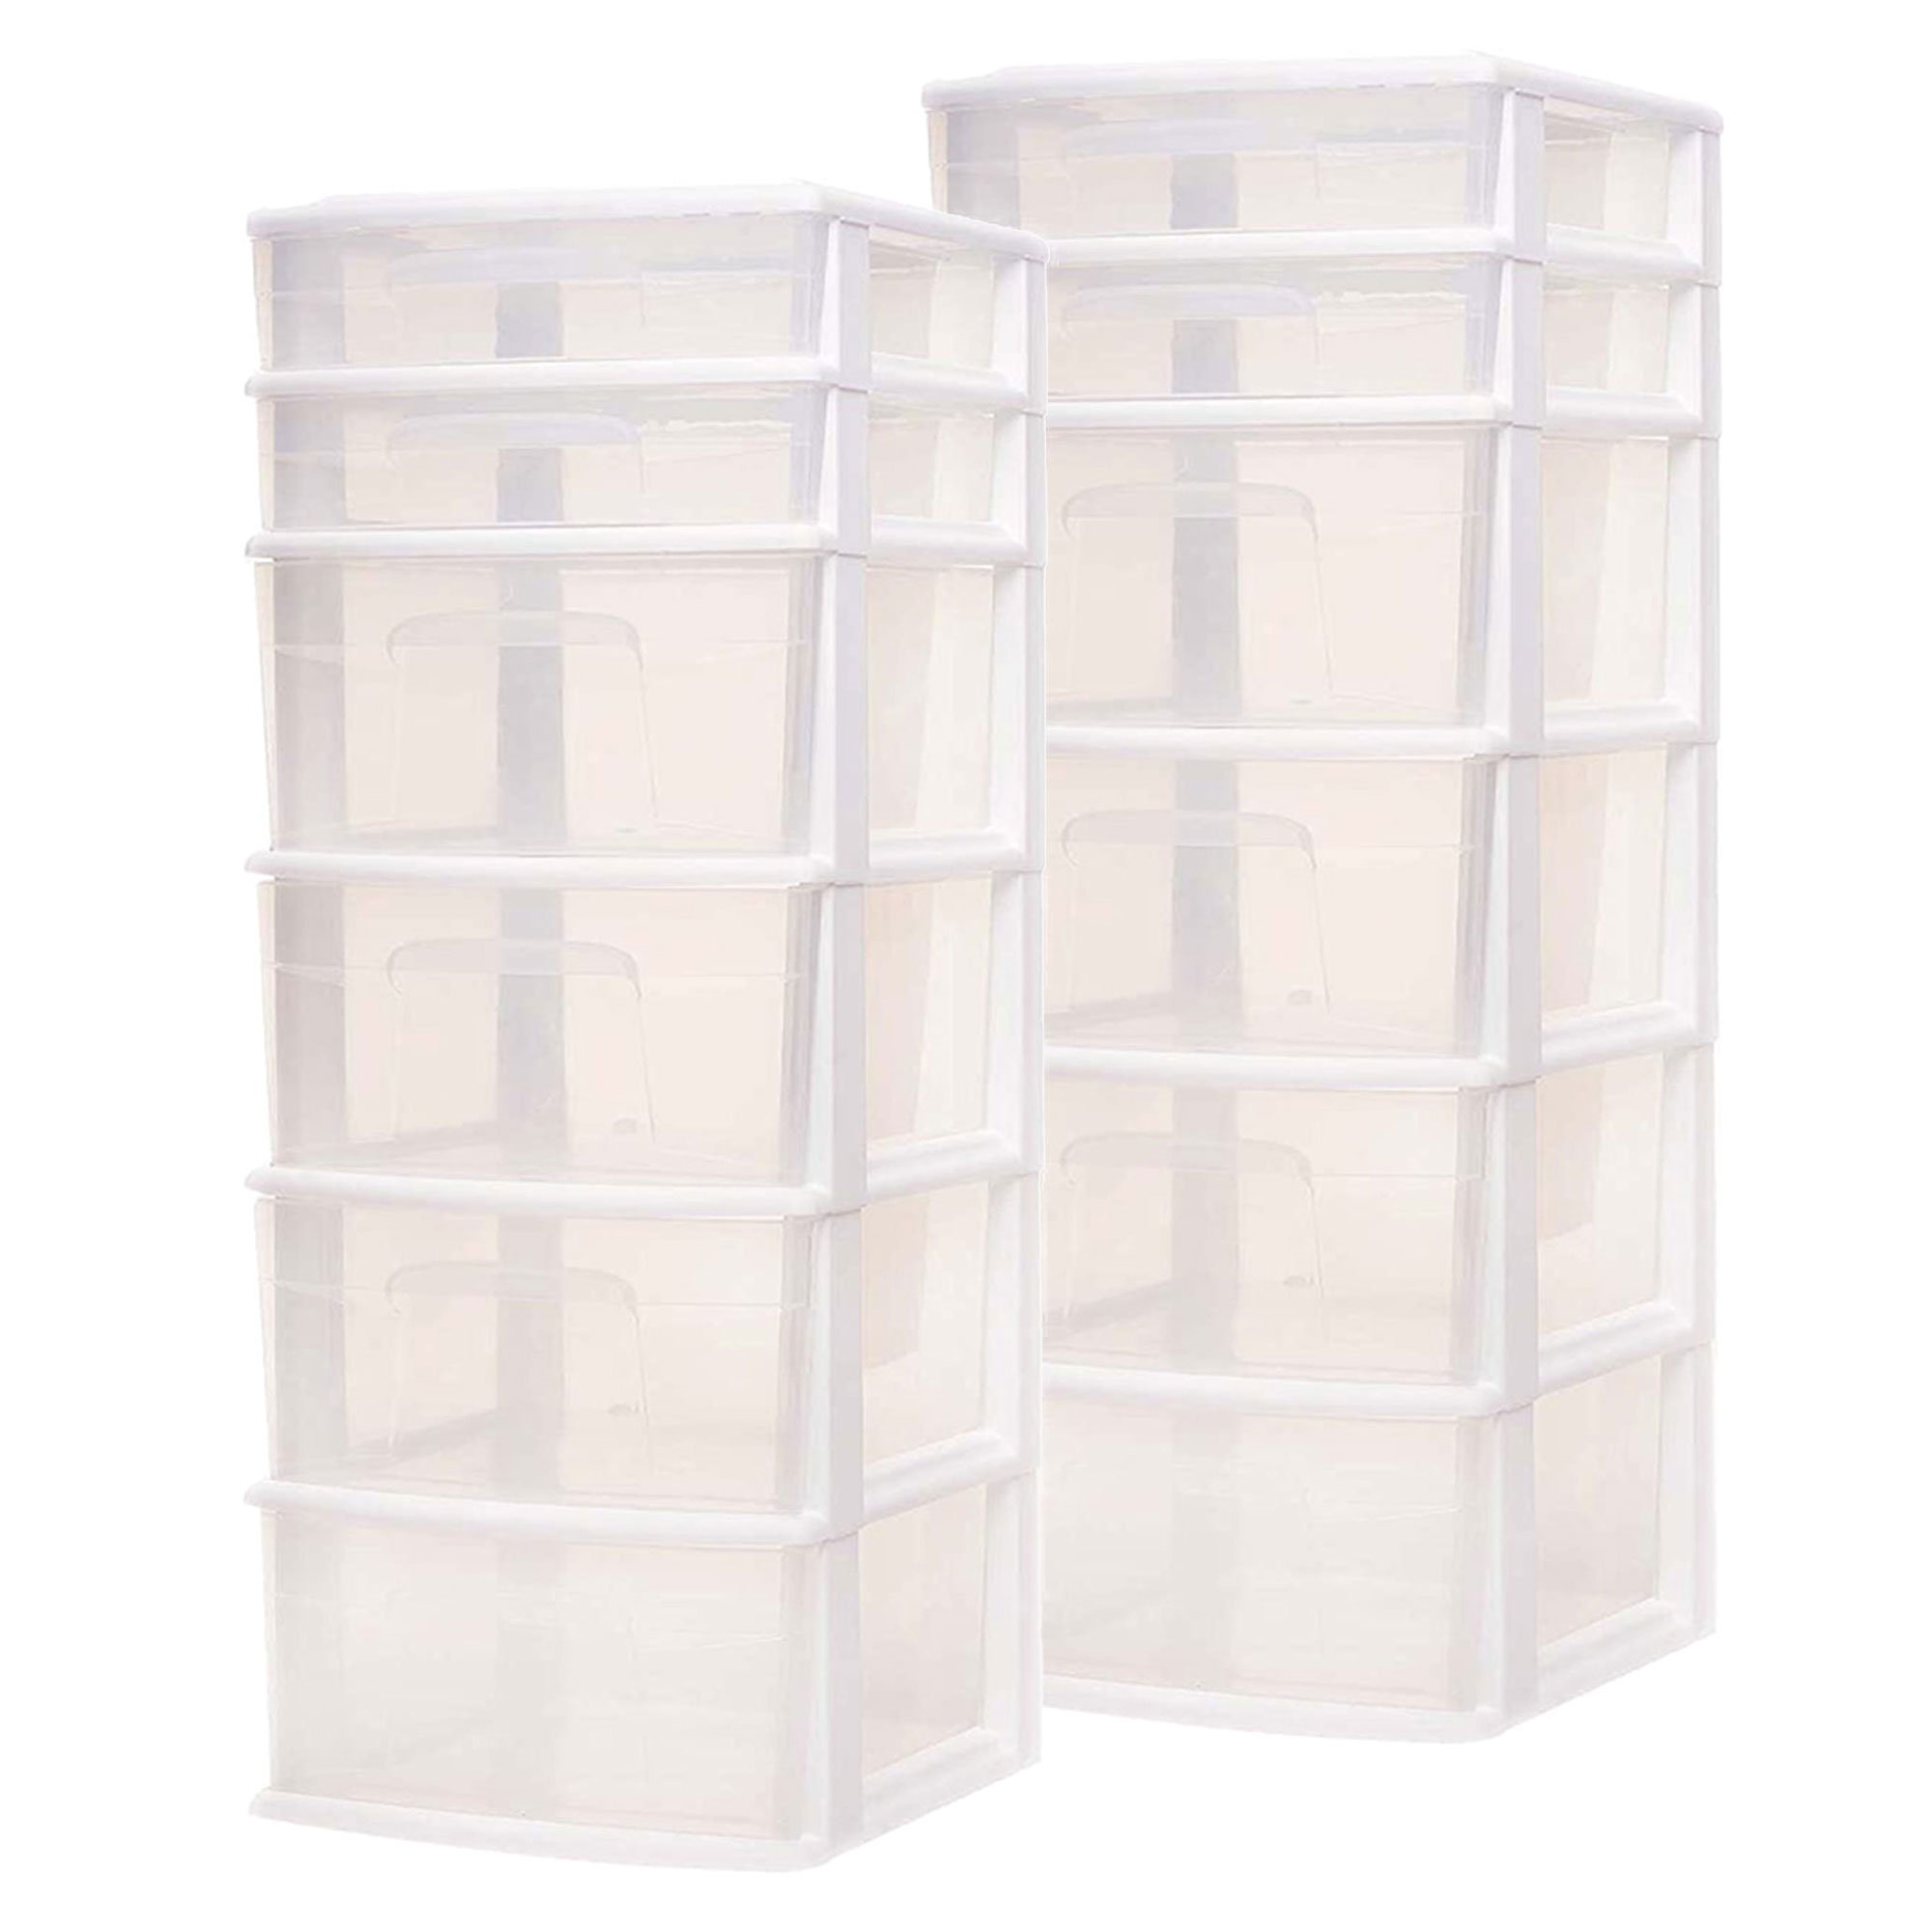 Homz Plastic 6 Clear Drawer Medium Home Storage Container Tower